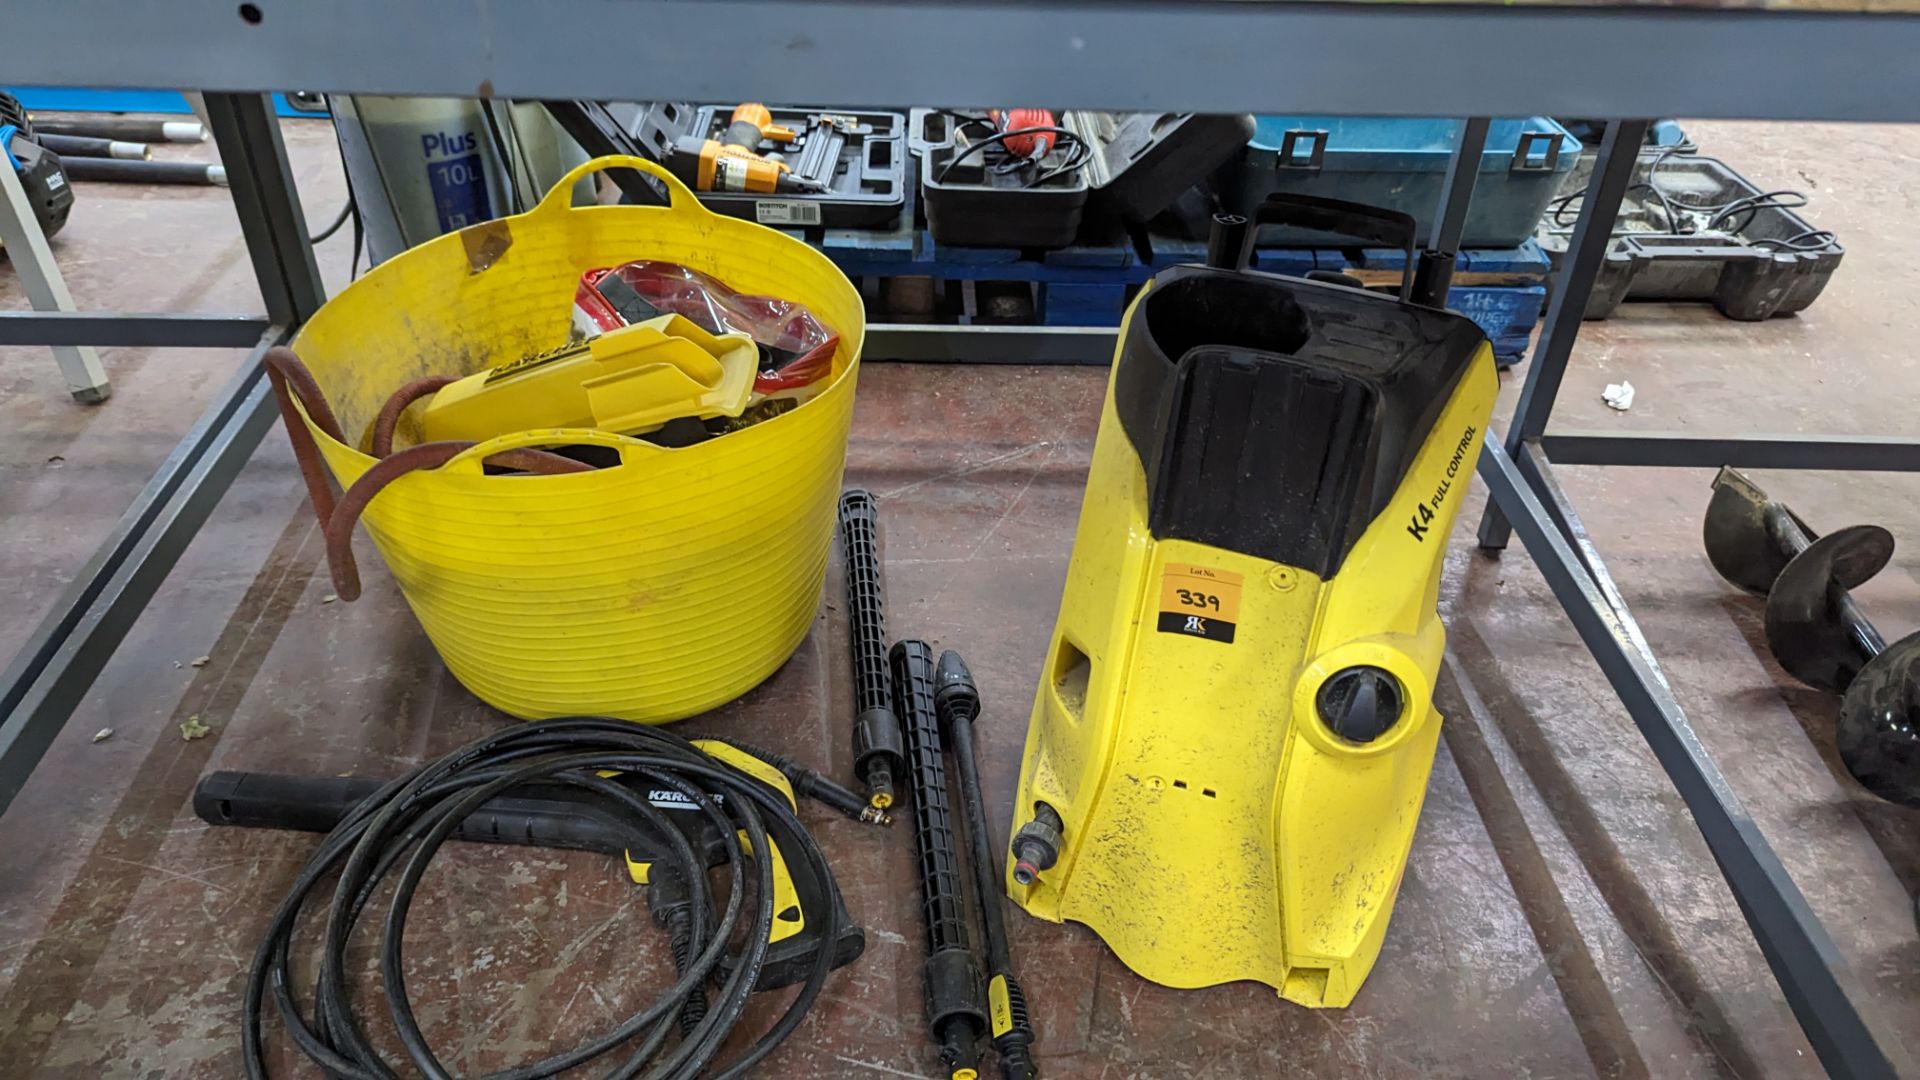 Karcher pressure washer including attachments plus bucket & contents - the total contents of the bay - Image 3 of 7